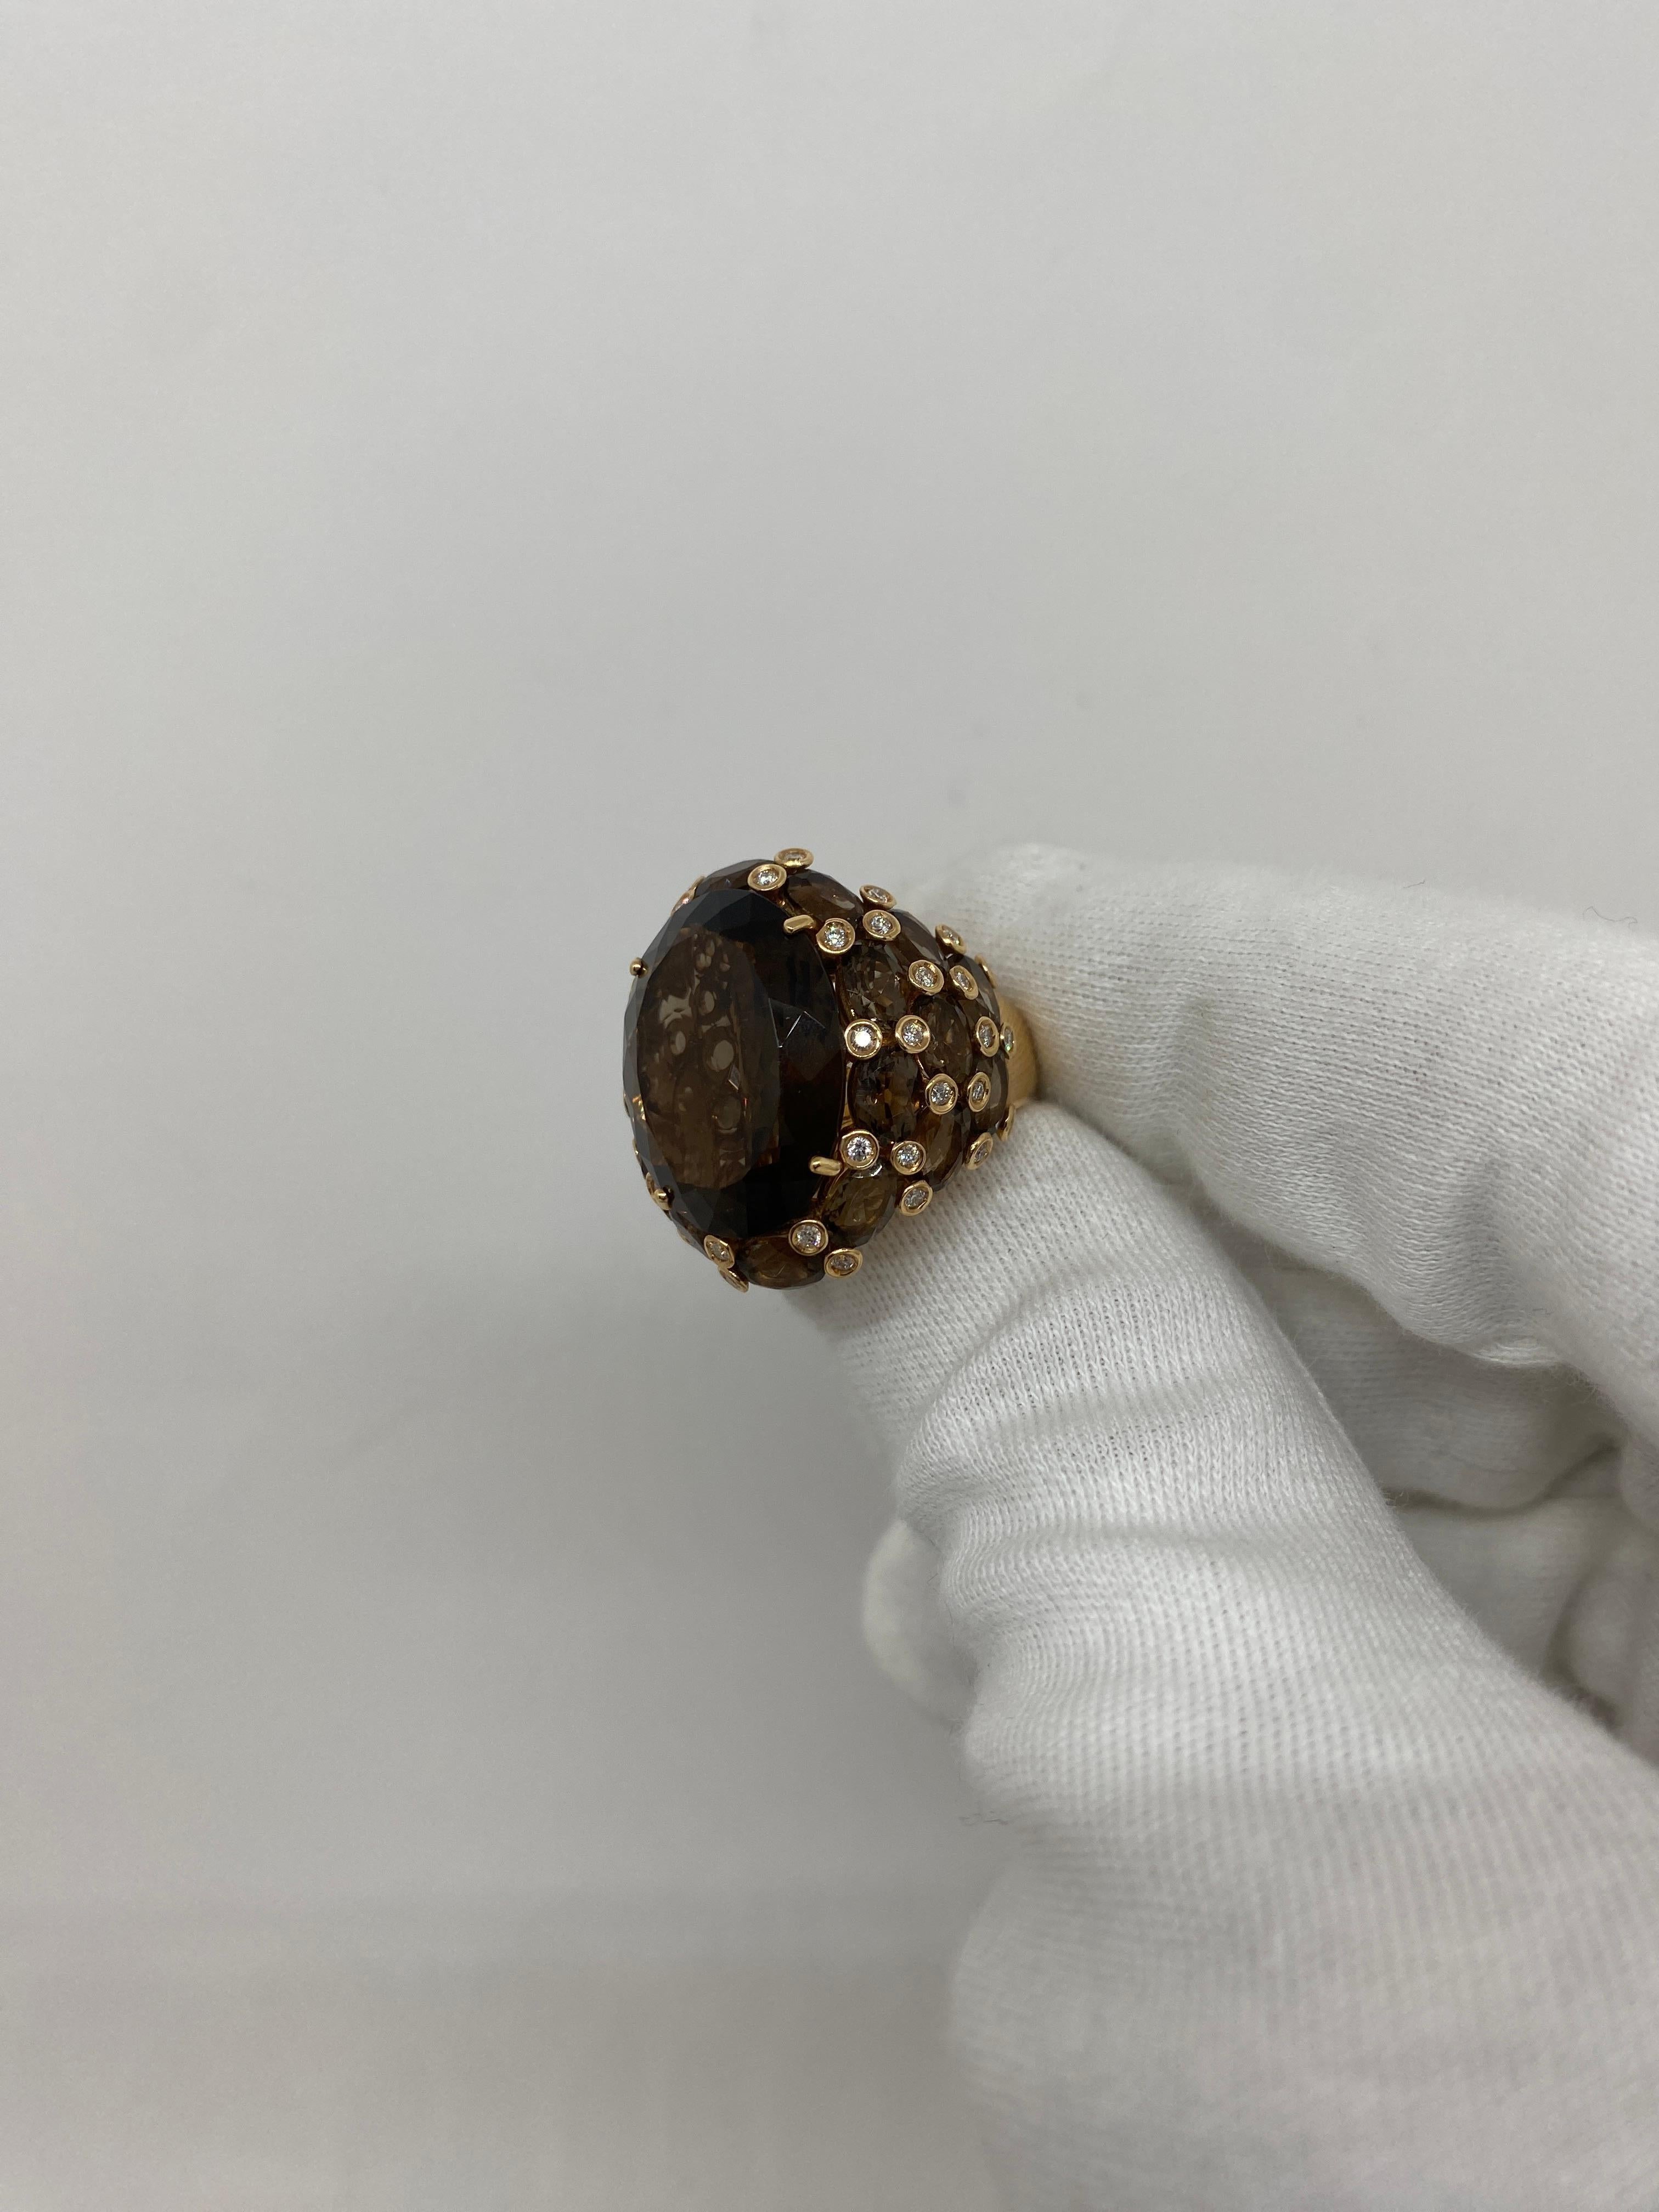 Ring made of 18kt rose gold with fume quartz and white brilliant-cut diamonds for ct.0.49

Welcome to our jewelry collection, where every piece tells a story of timeless elegance and unparalleled craftsmanship. As a family-run business in Italy for